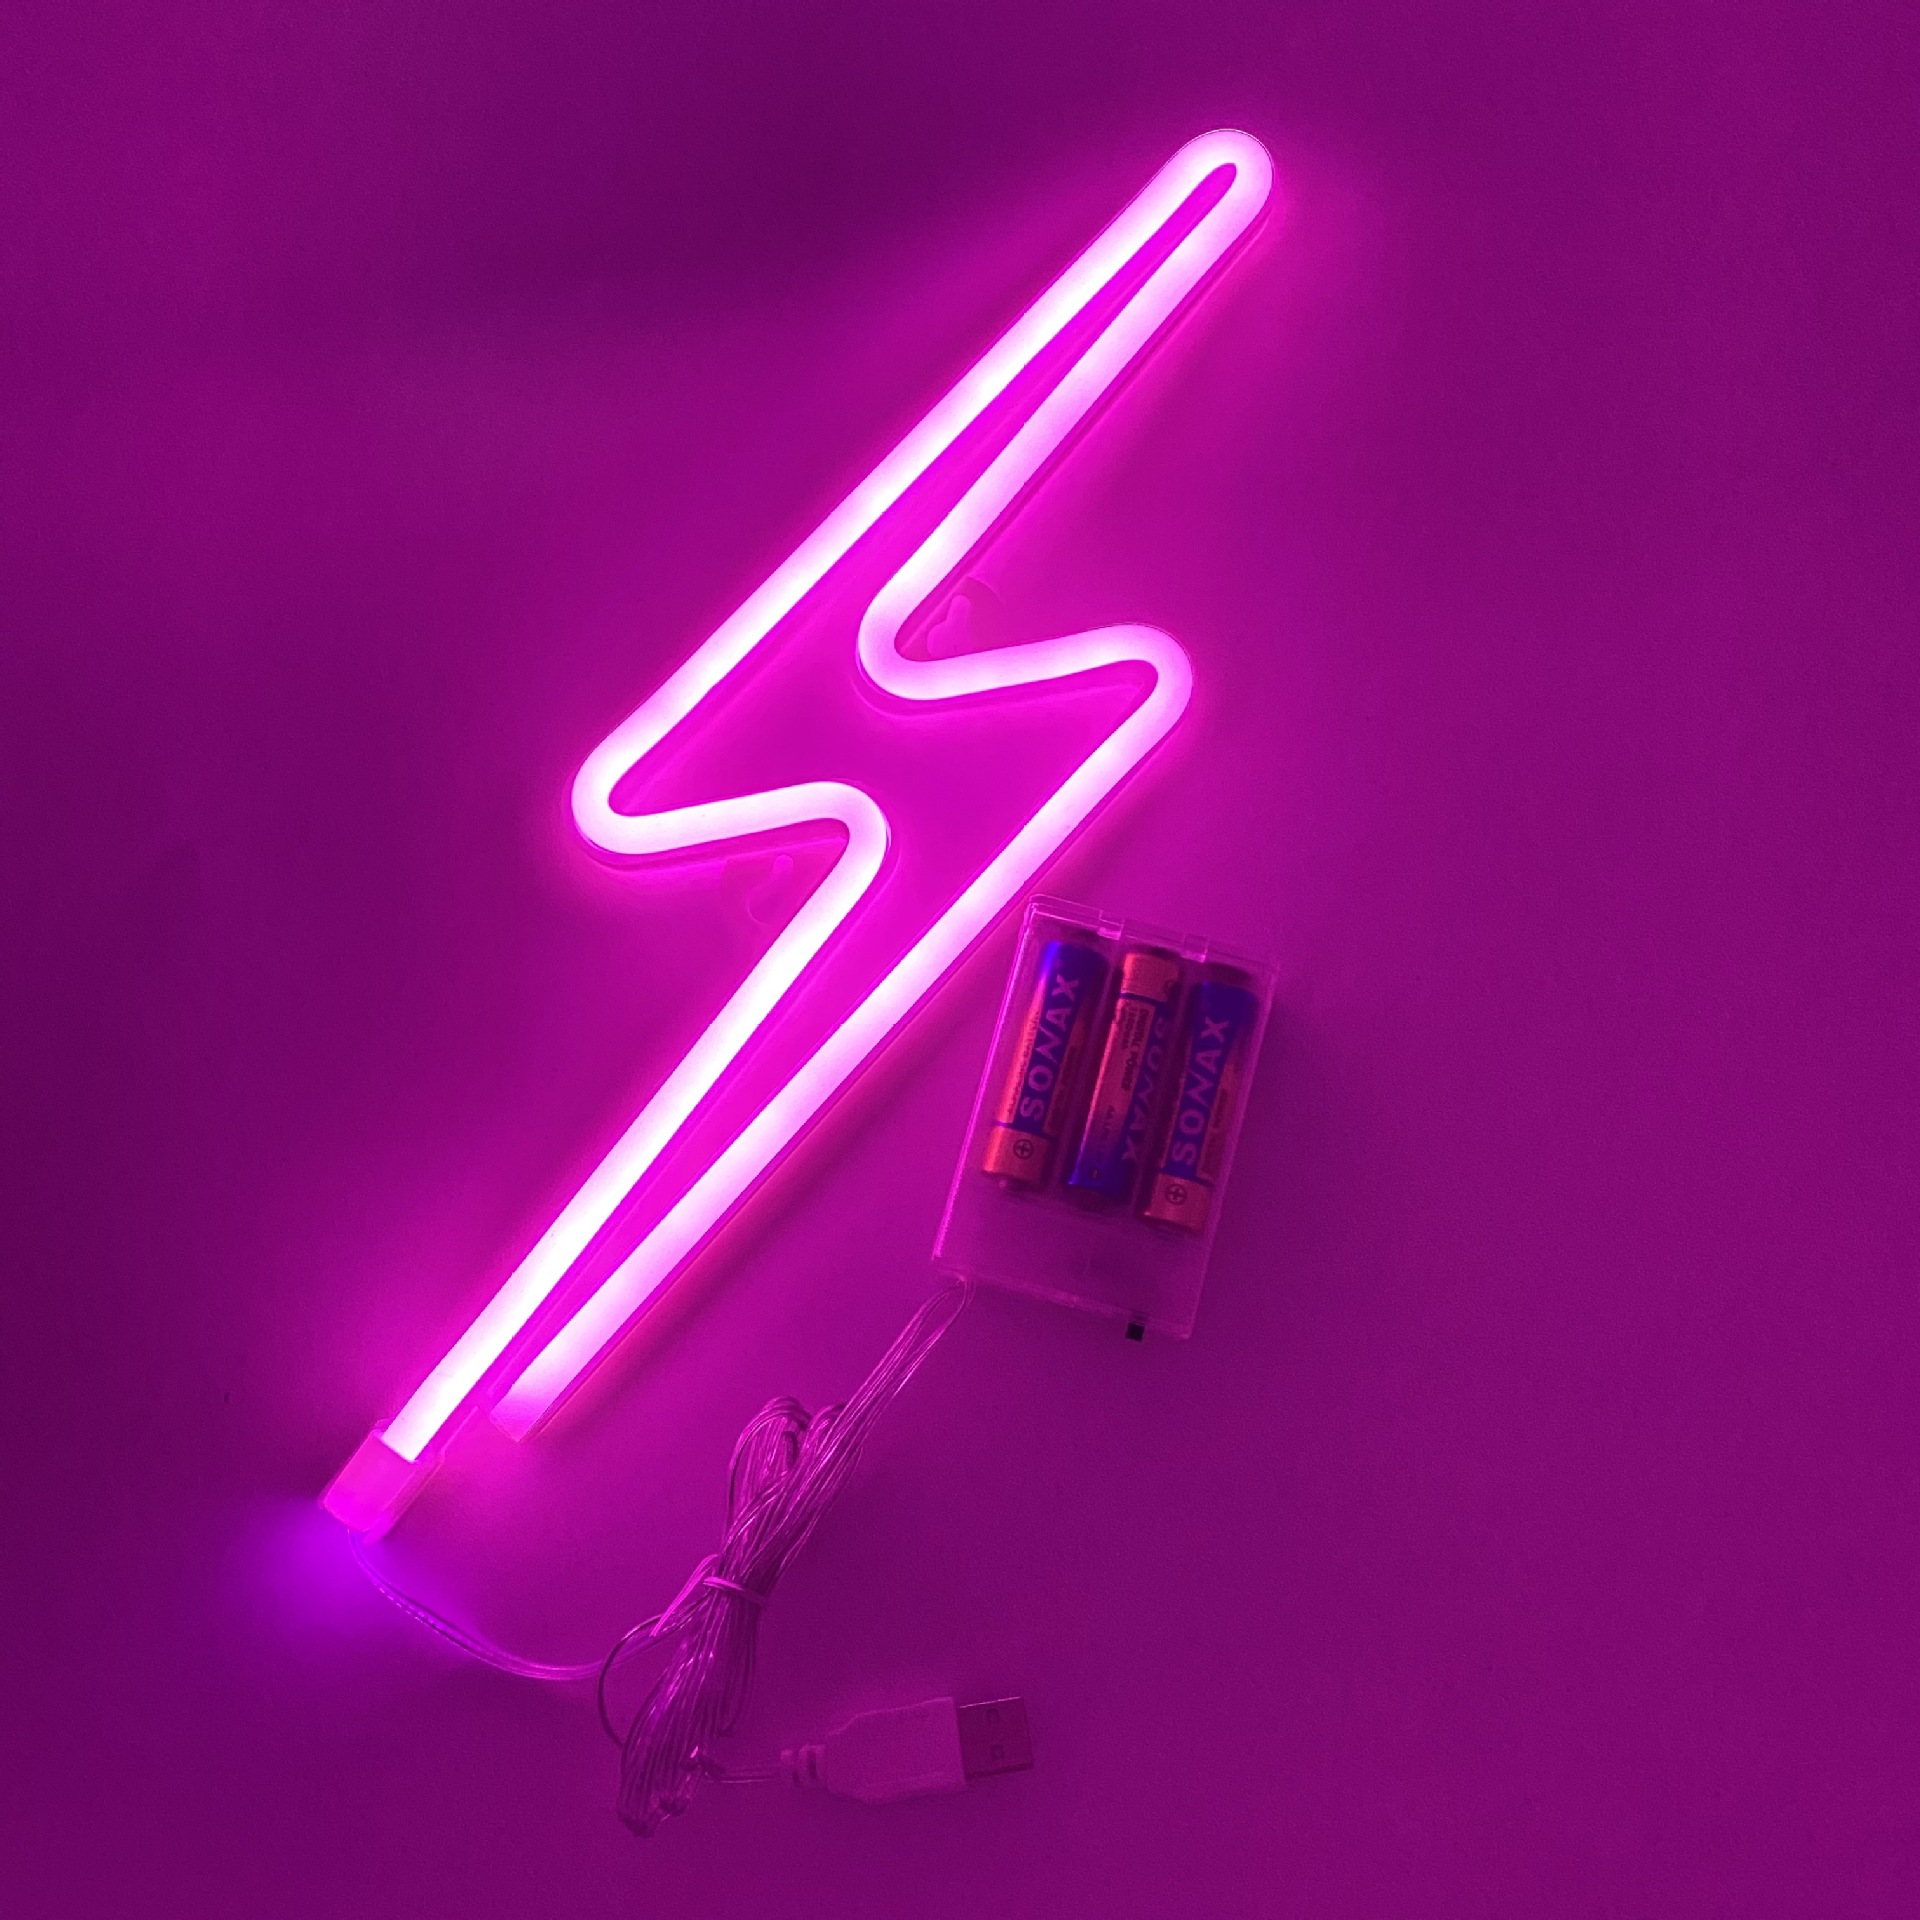 New LED Neon Sign Lightning Shaped USB Battery Operated Night Light Wall Decorative Lamp For Home Party Living Room Xmas Gift